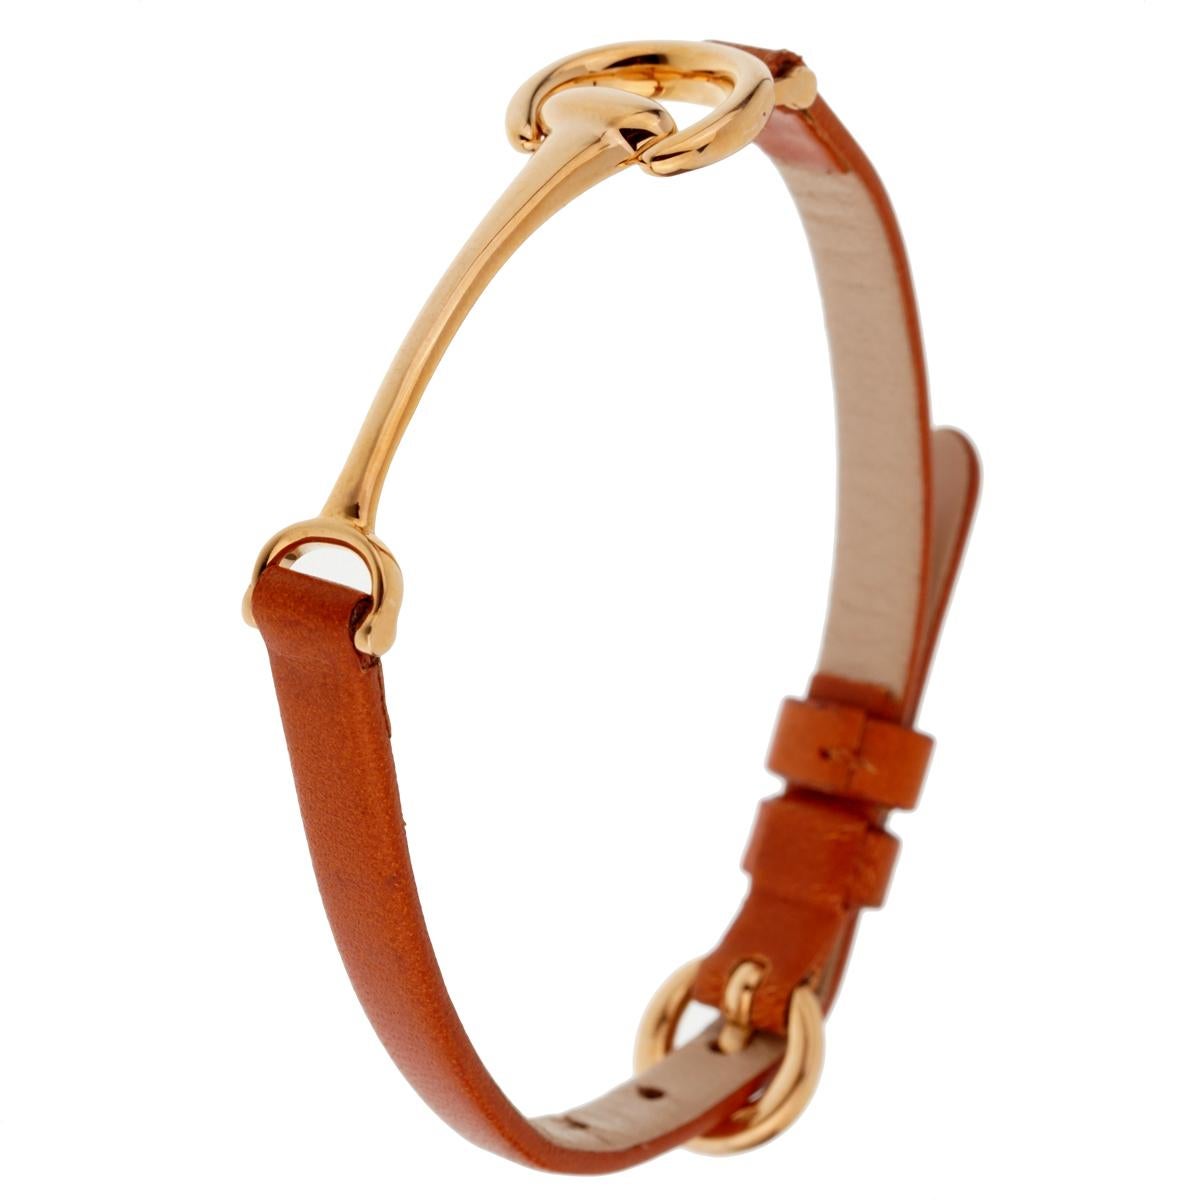 A fabulous handcrafted “Horse bit” bracelet in 18k rose gold with brown calfskin leather strap. The HorseBit is a symbol of elegance in the equestrian world.

Length Upto 7 3/4